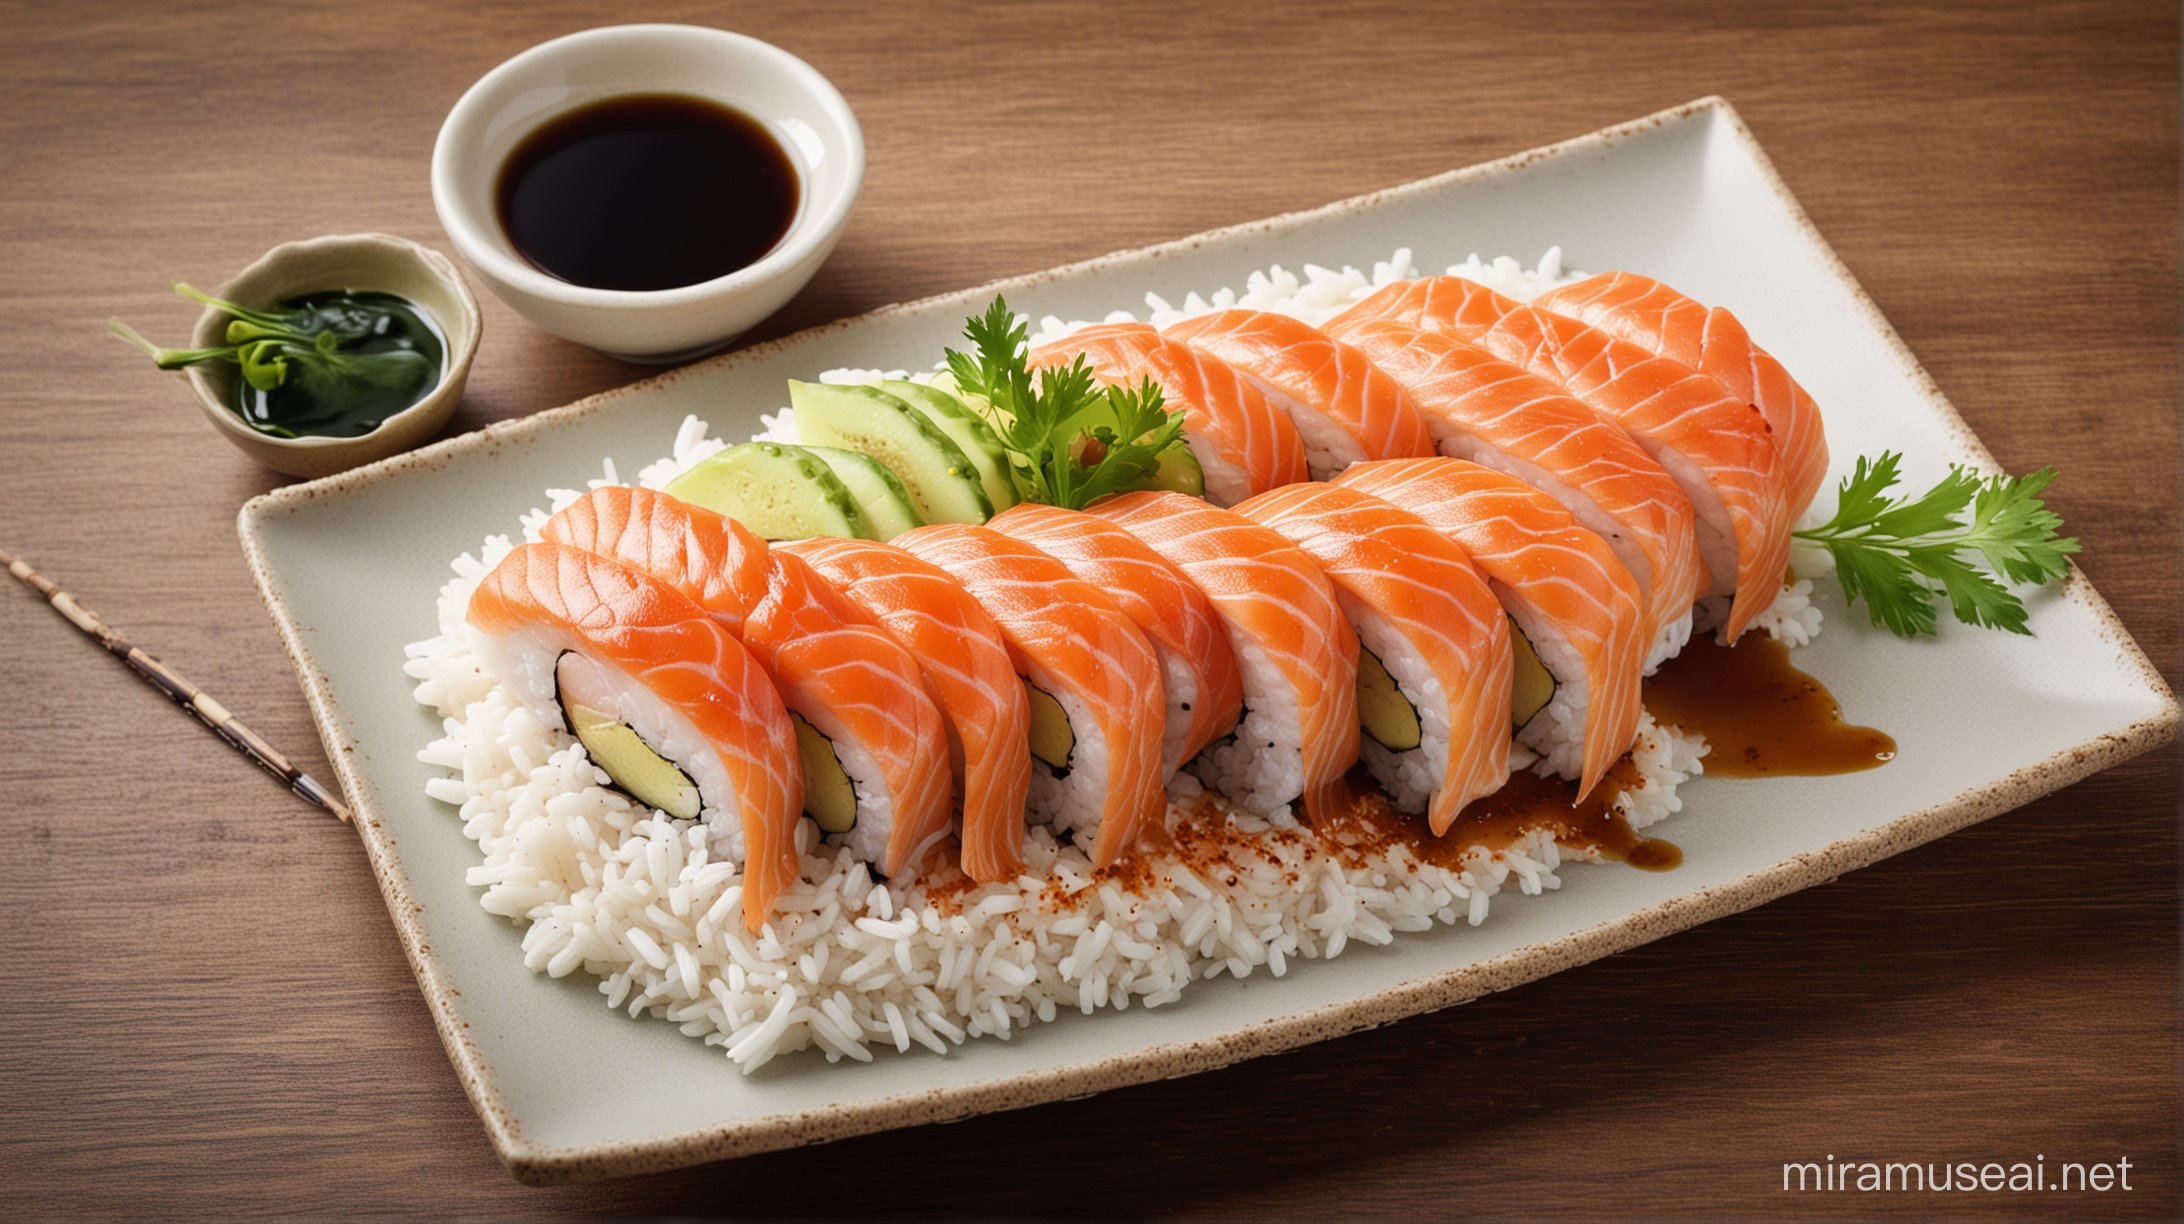 Japanese Sushi: Fresh fish slices over soft rice, served with wasabi and soy sauce, evoking the perfect fresh and savory sensation.